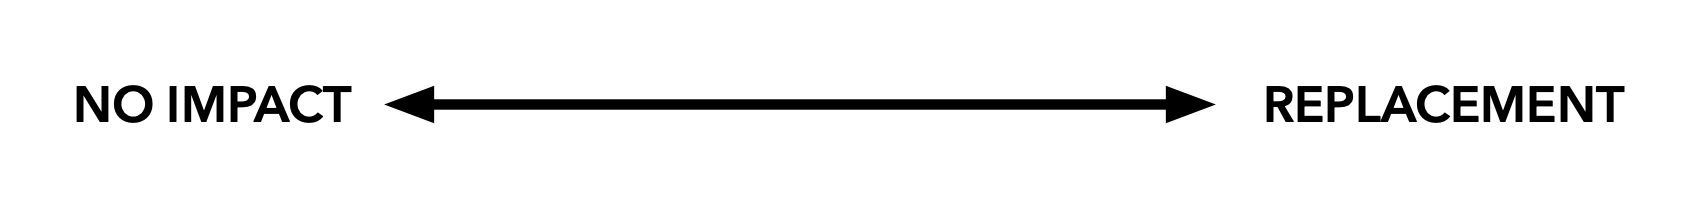 A line indicating a continuum between two extremes: ‘no impact‘ on one end and ‘replacement‘ on the other.